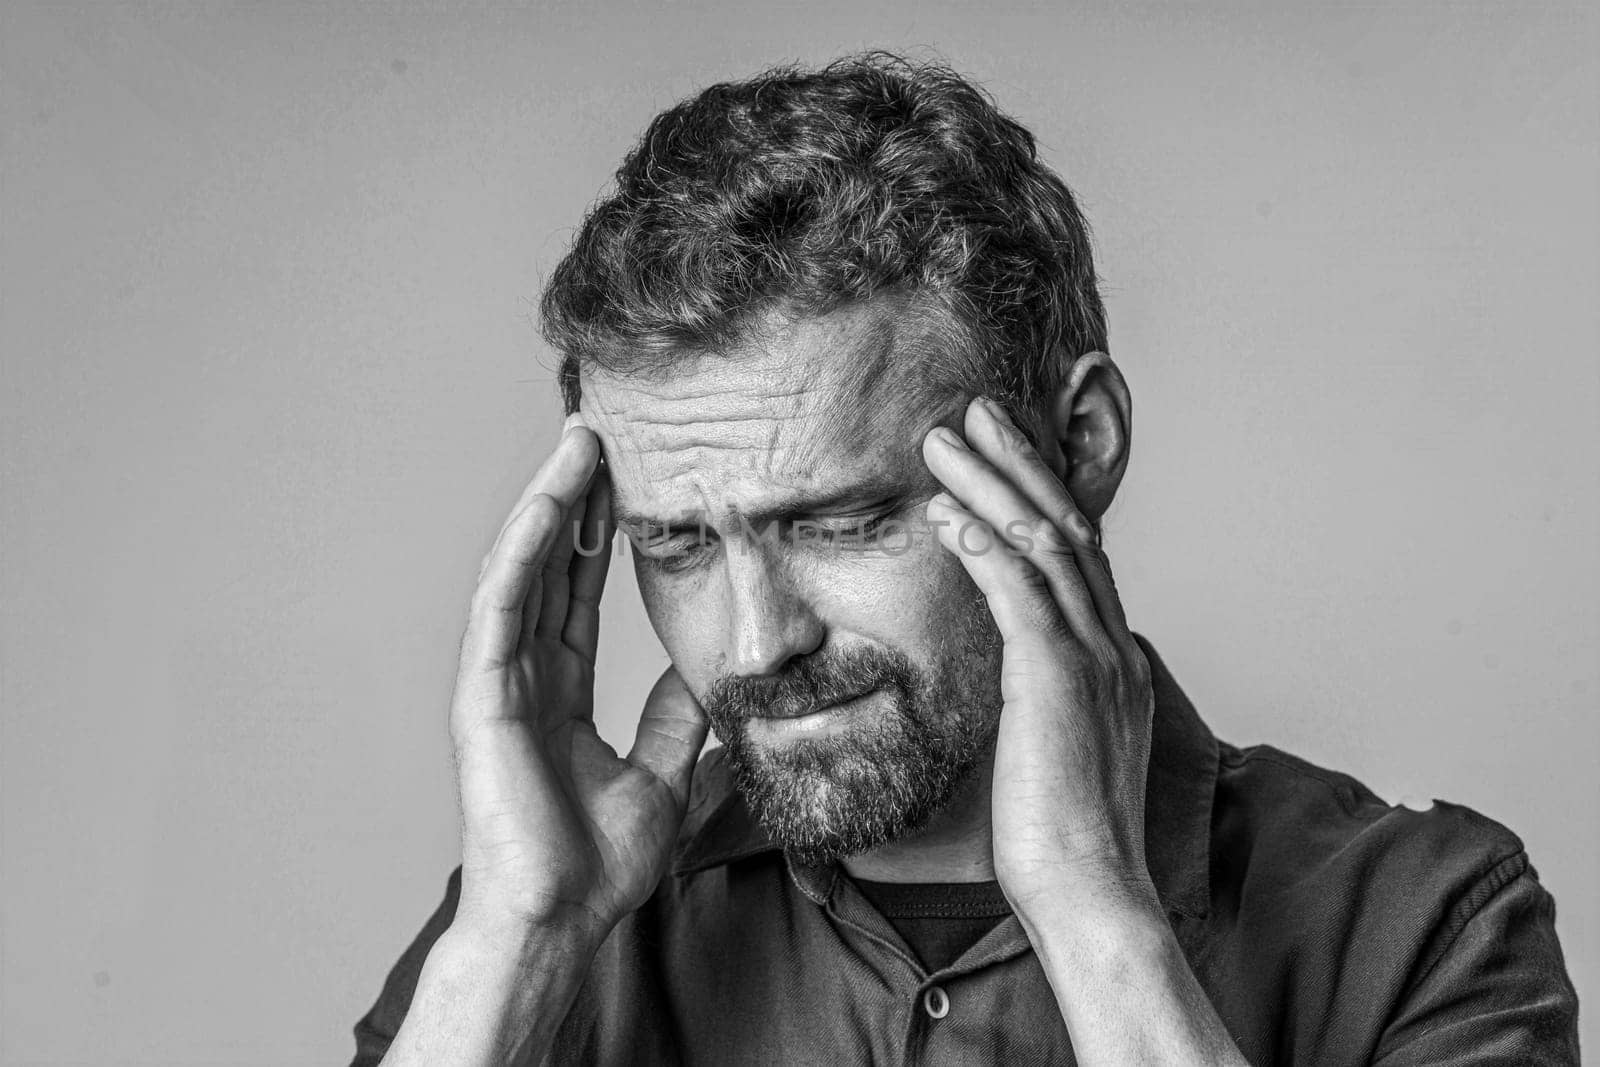 Man who appears to be in pain, holding his face with two hands against a plain white background. The image captures the expression of discomfort and suffering on the mans face. by LipikStockMedia